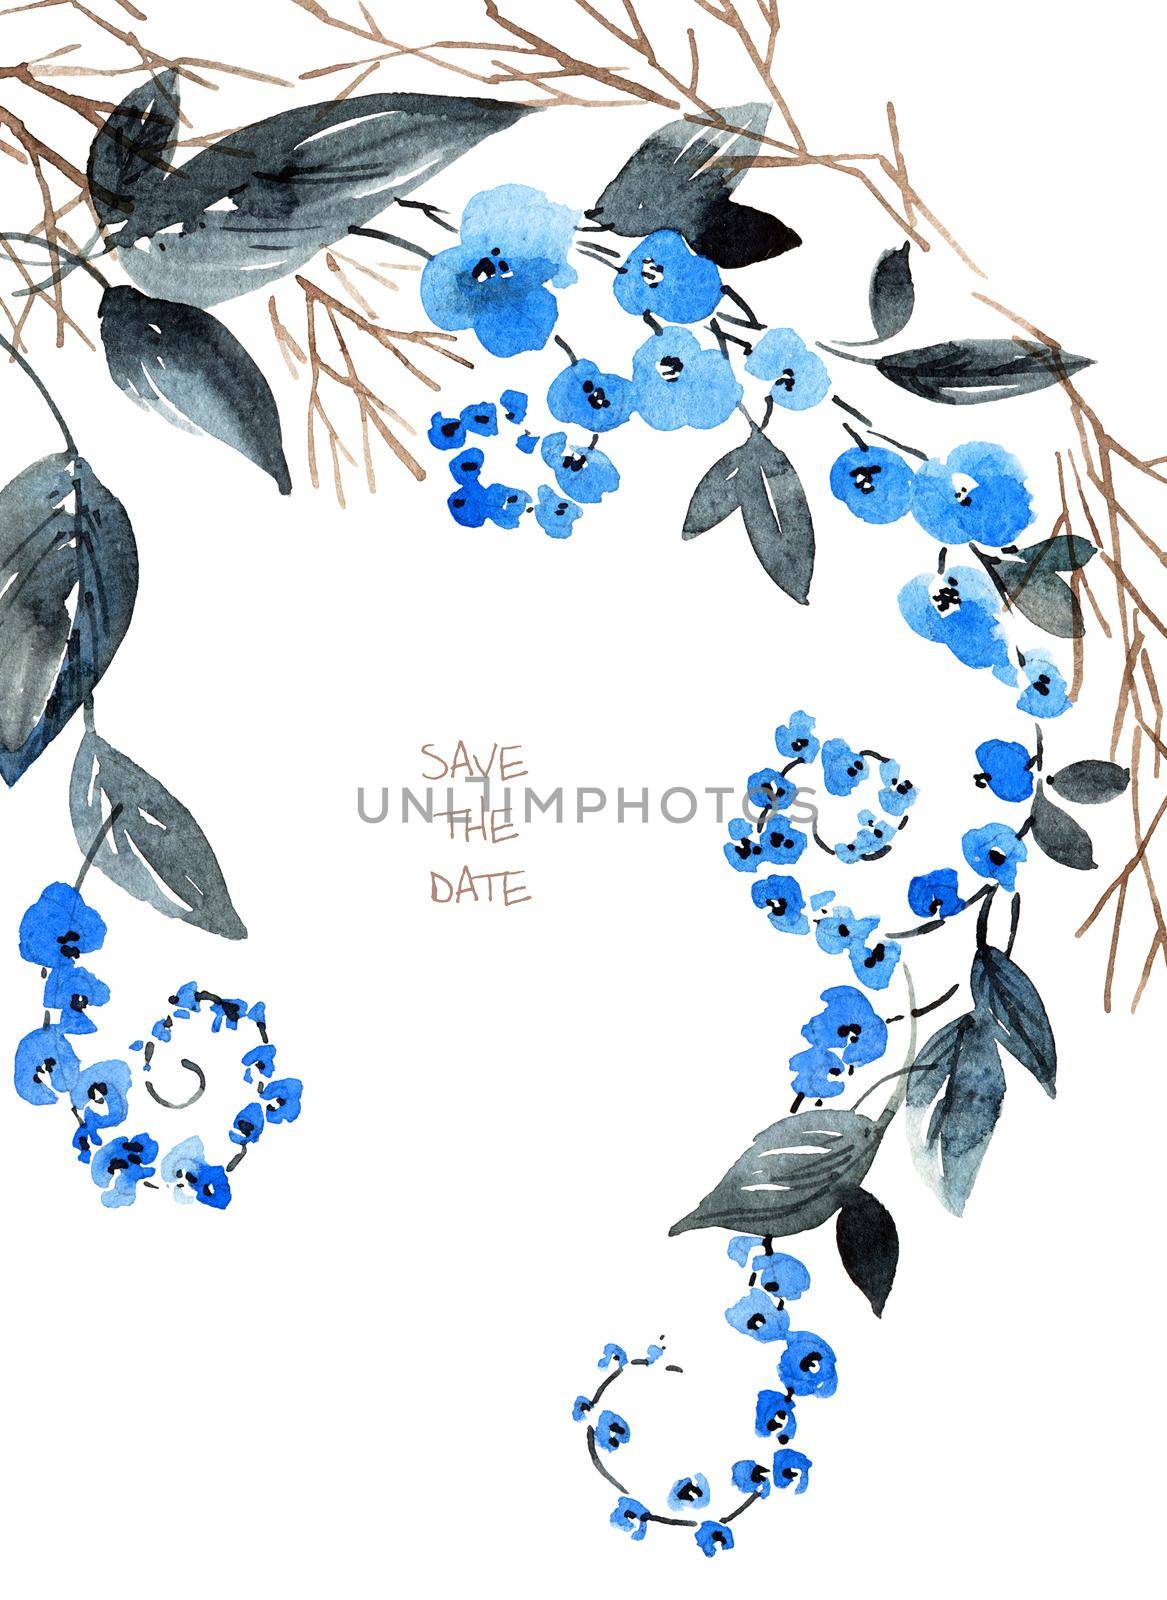 Watercolor illustration of floral wreath. Design for greeting card, invitation or cover. Hand-drawn blue flowers, buds and leaves.